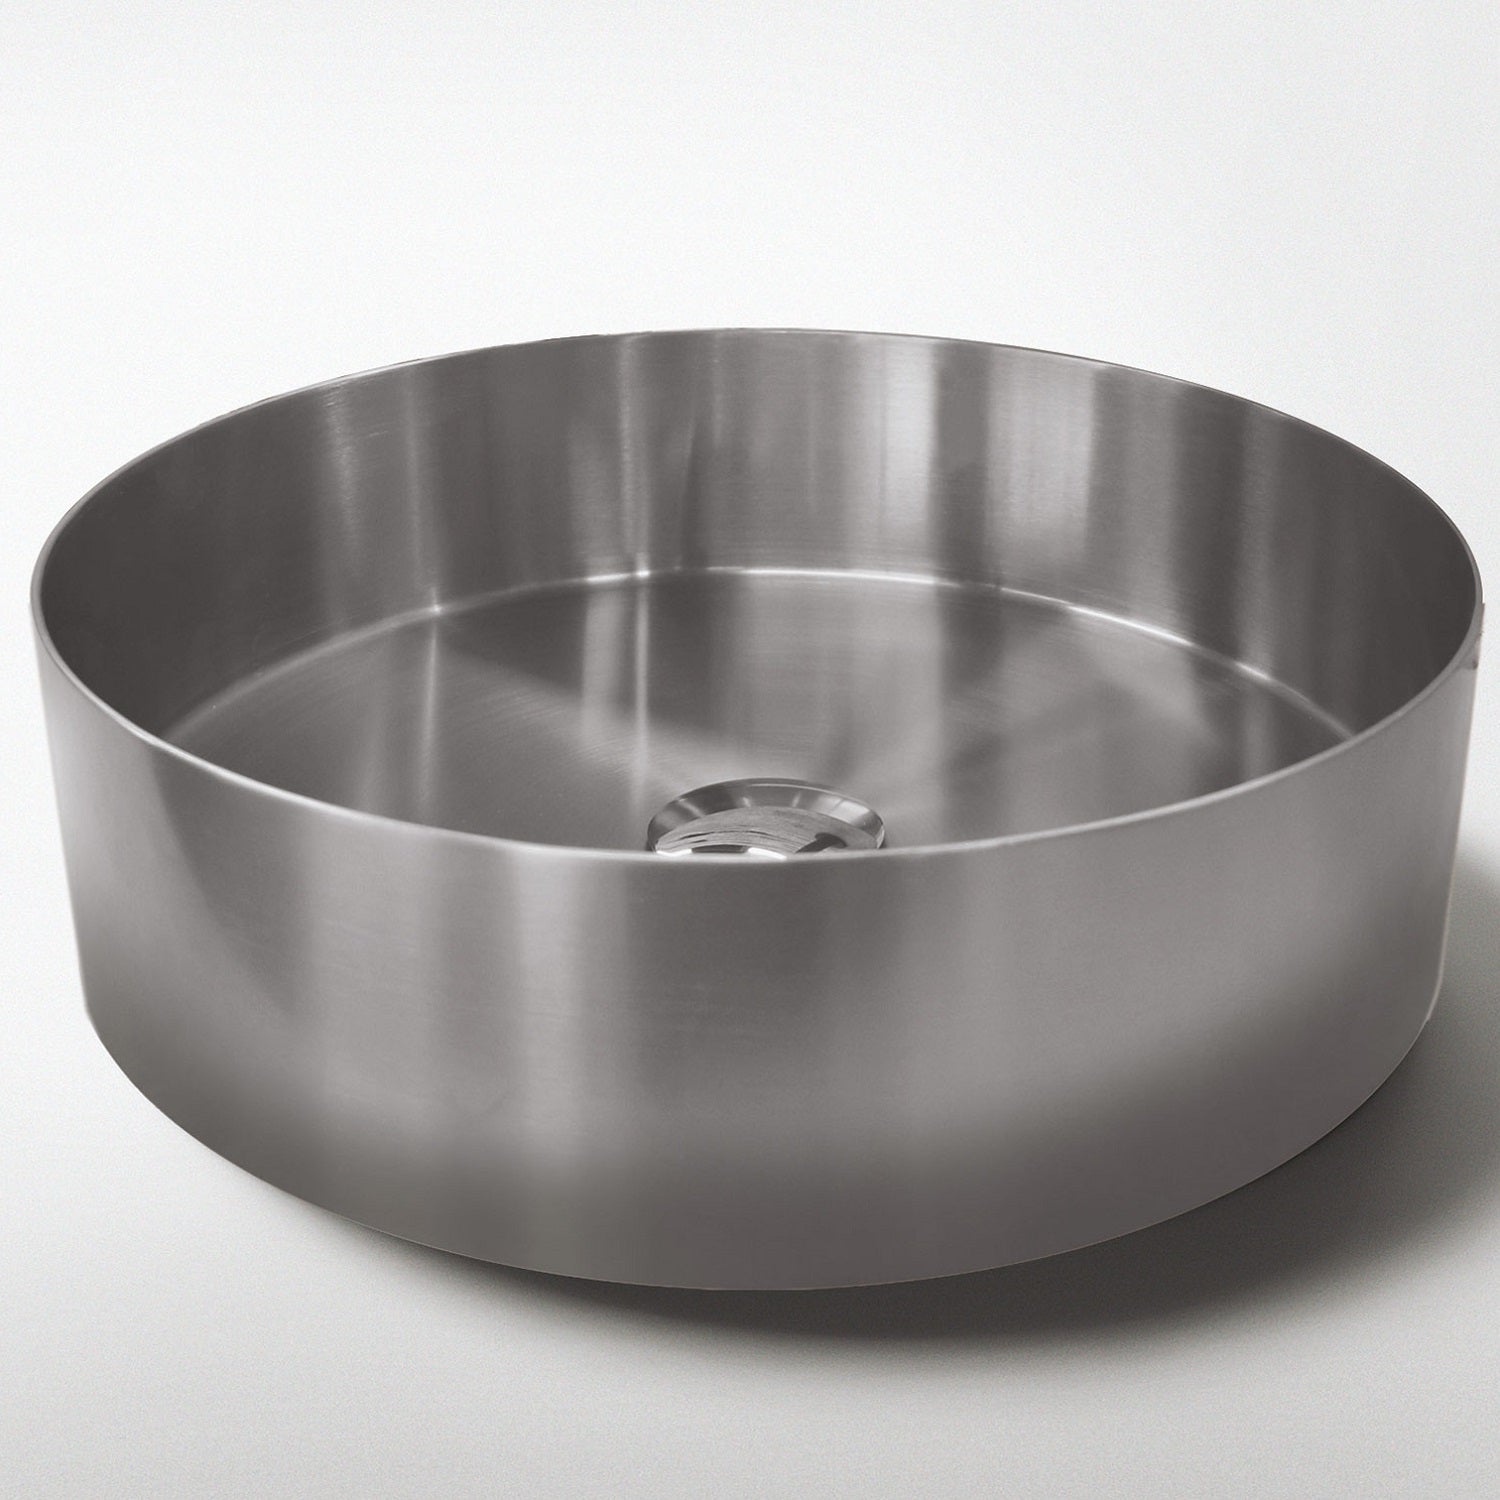 Studio Bagno Meteor Above Counter Basin - Stainless Steel